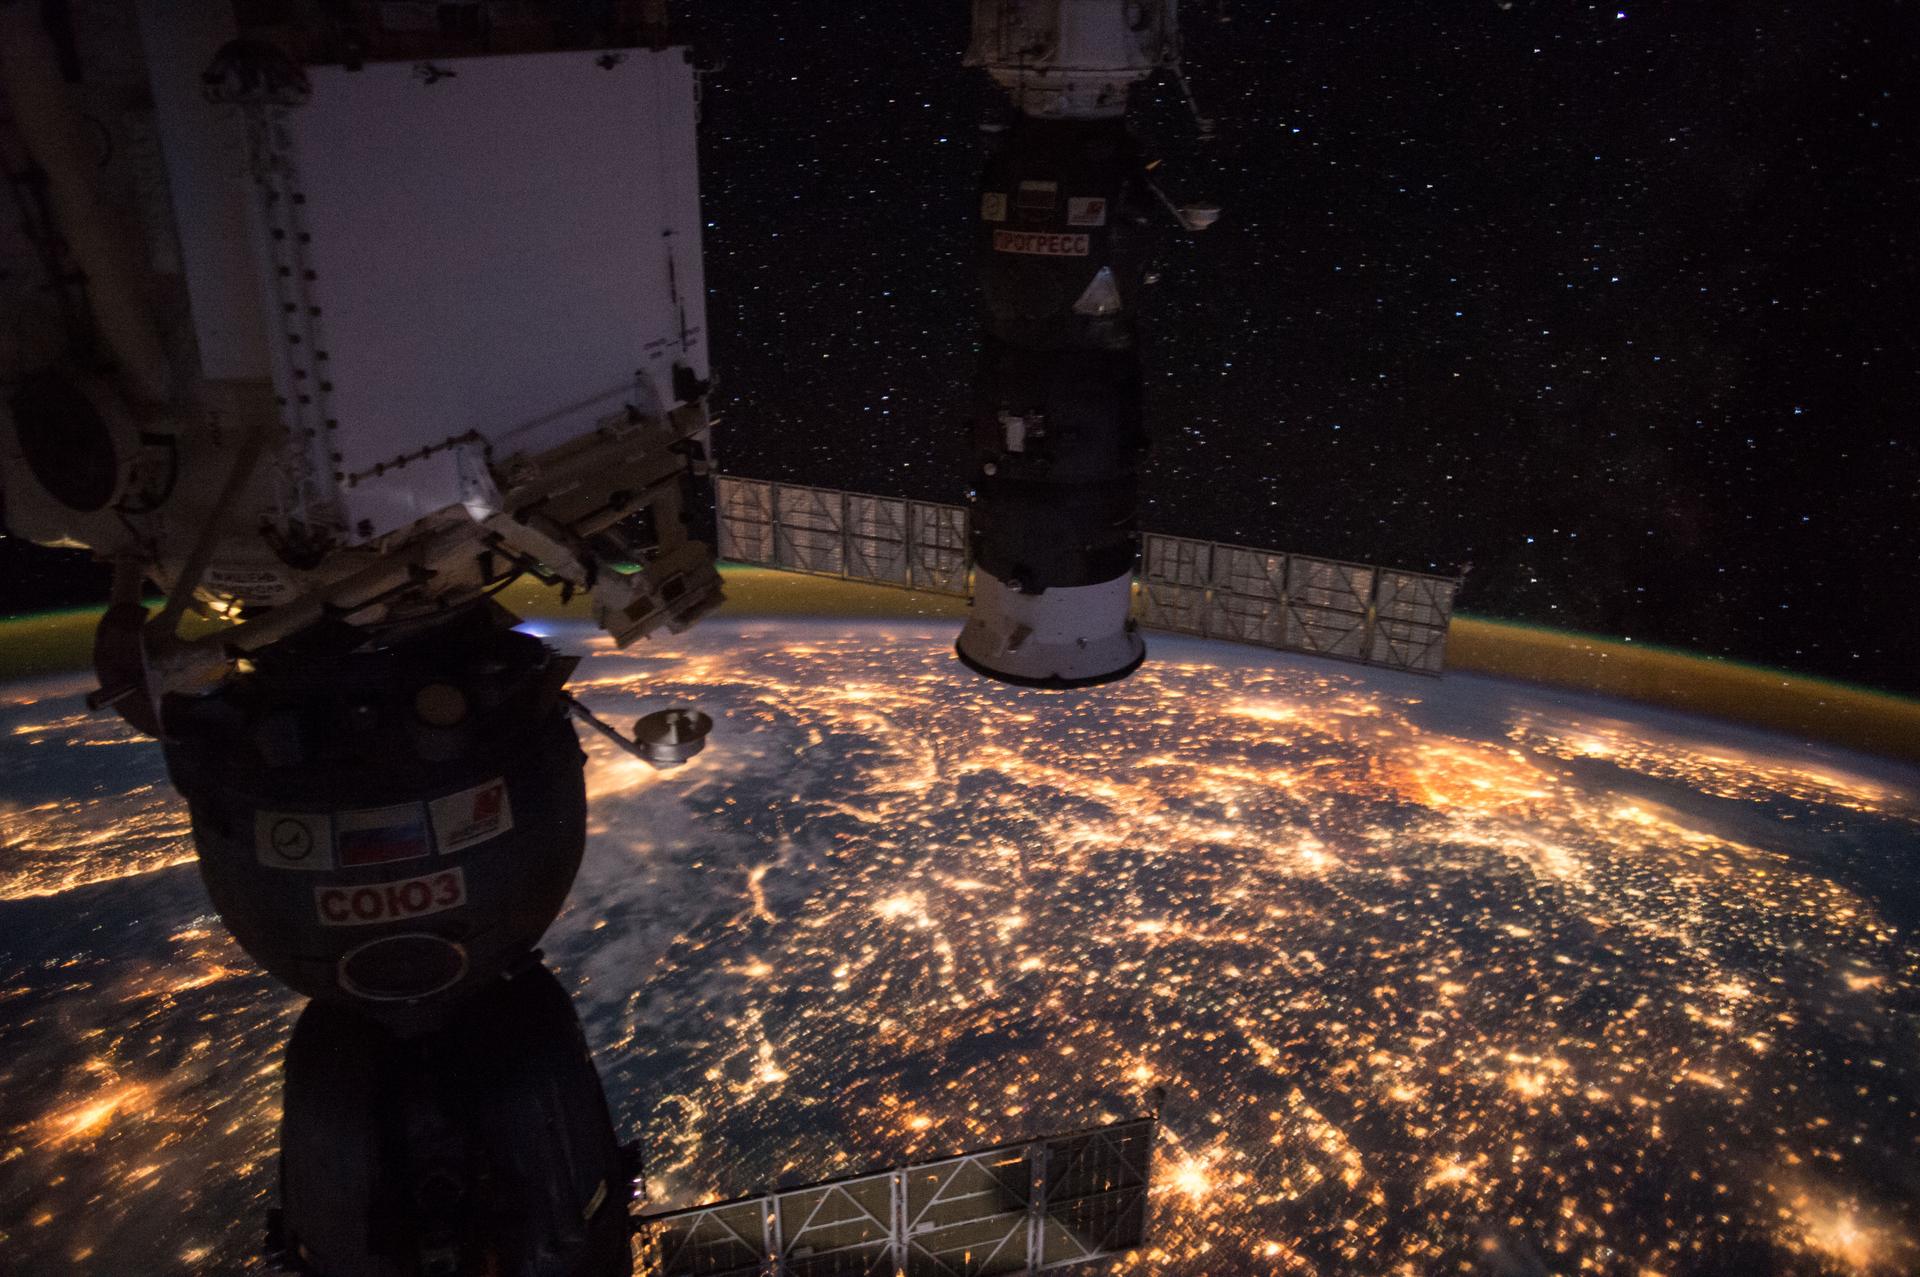 Earth observation taken by Expedition 49 crew NASA ID: iss049e009356 ISS049e009356 (09/24/2016) --- Earth observation taken during a night pass by the Expedition 49 crew aboard the International Space Station. Framed by the docked Soyuz and Progress spacecraft is Western Europe. The bright, dense lights in the East are the Netherlands, Belgium. The dark strip is the Alps Date Created:2016-09-24 Center:JSC Photographer:Takuya Onishi Visit JSC Website images-assets.nasa.gov/image/iss049e009356/iss049e009356~orig.jpg